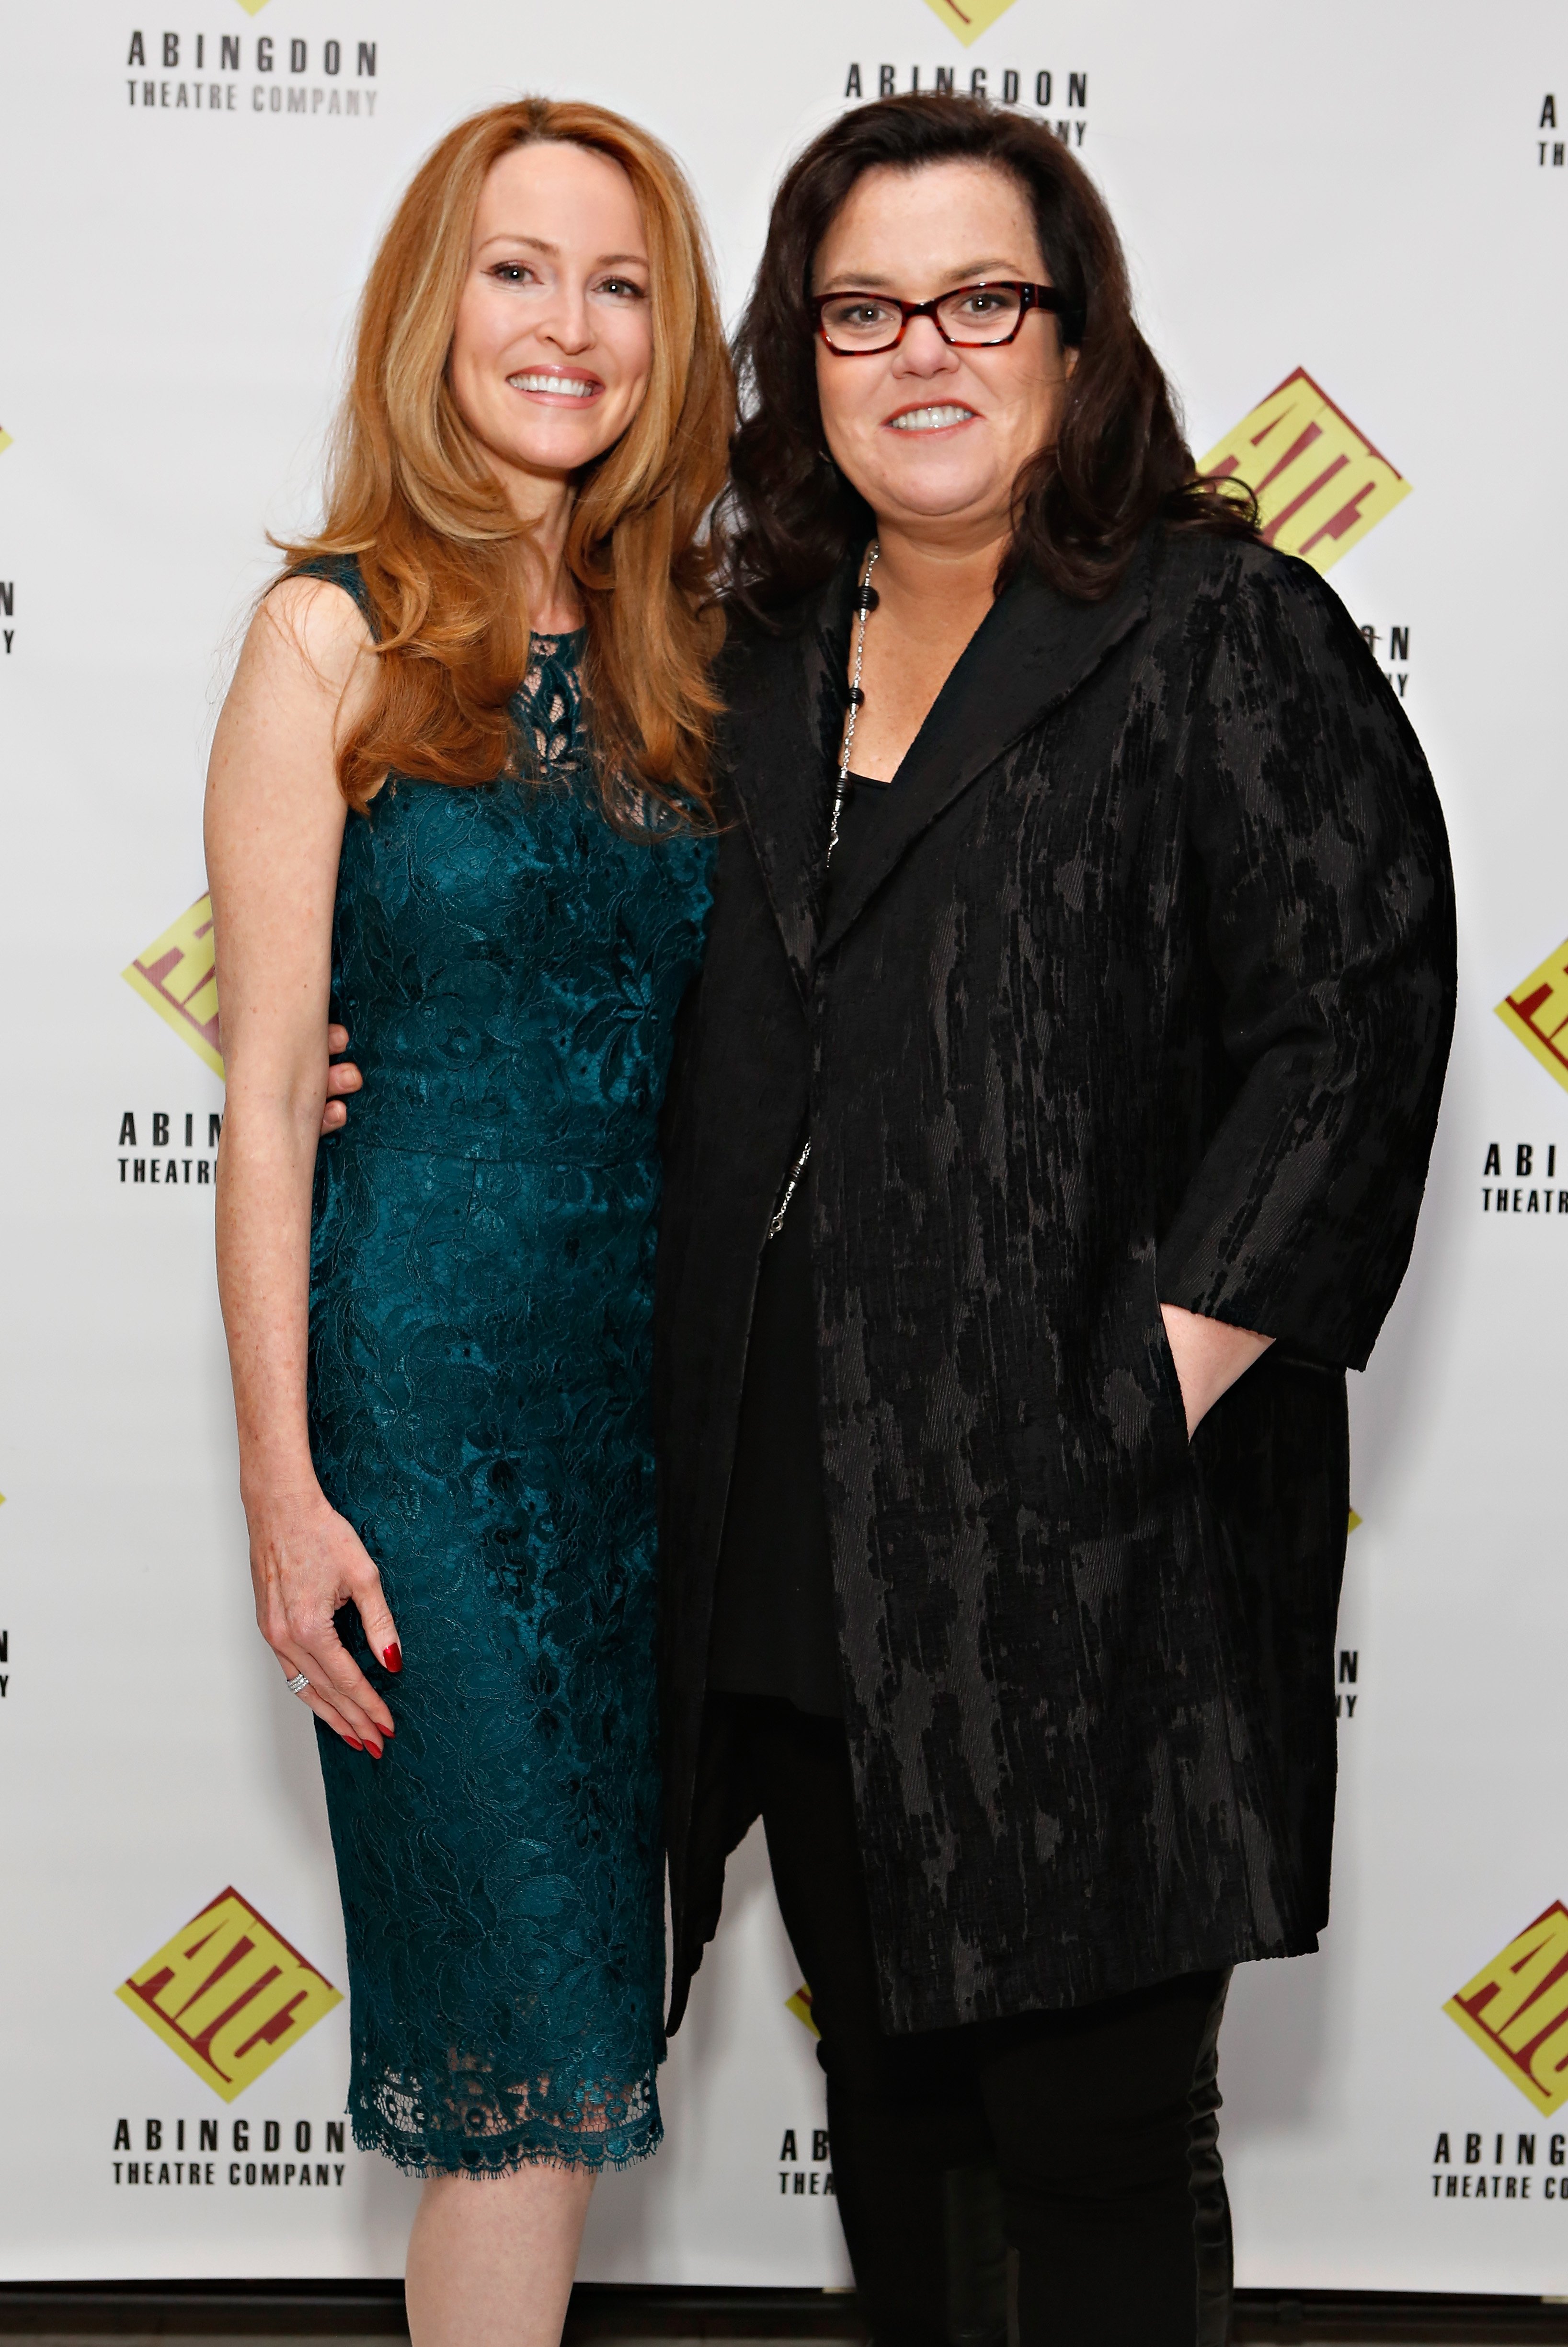 Michelle Rounds and Rosie O'Donnell attends Abingdon Theatre Company's 20th Anniversary Gala at Espace on November 19, 2012 in New York City | Photo: Getty Images